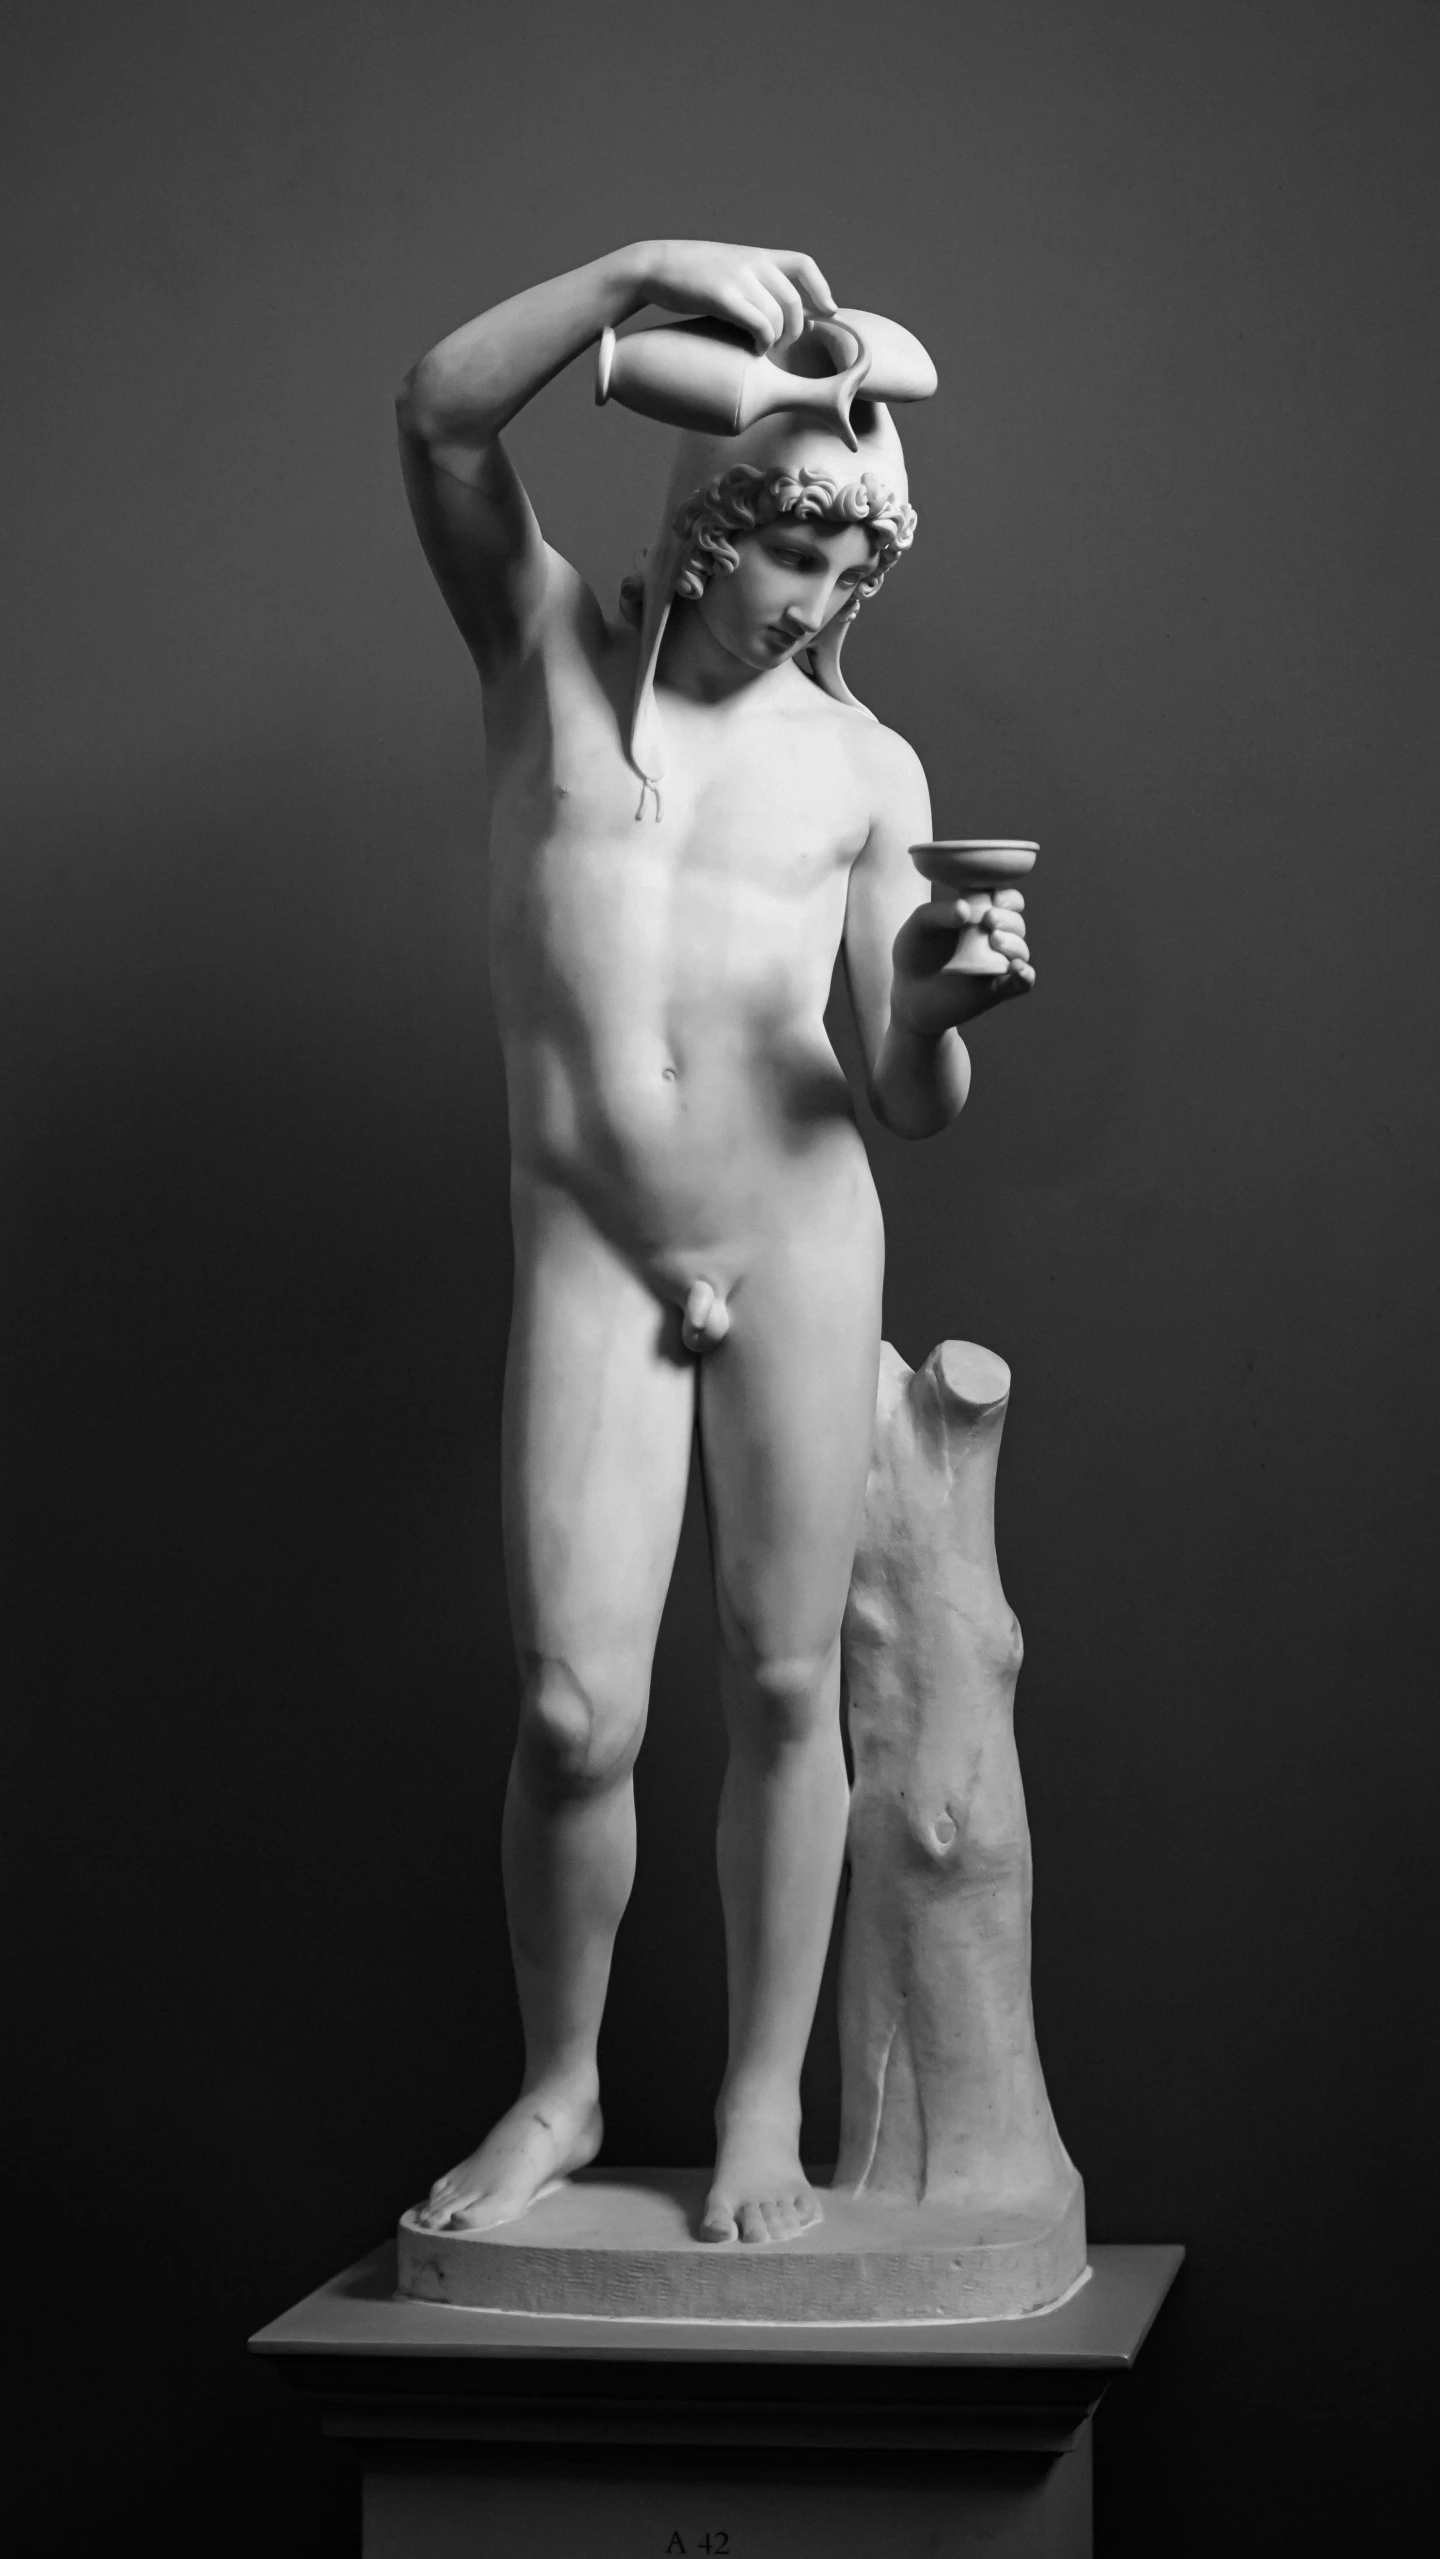 a statue of an individual holding a cup in their hands